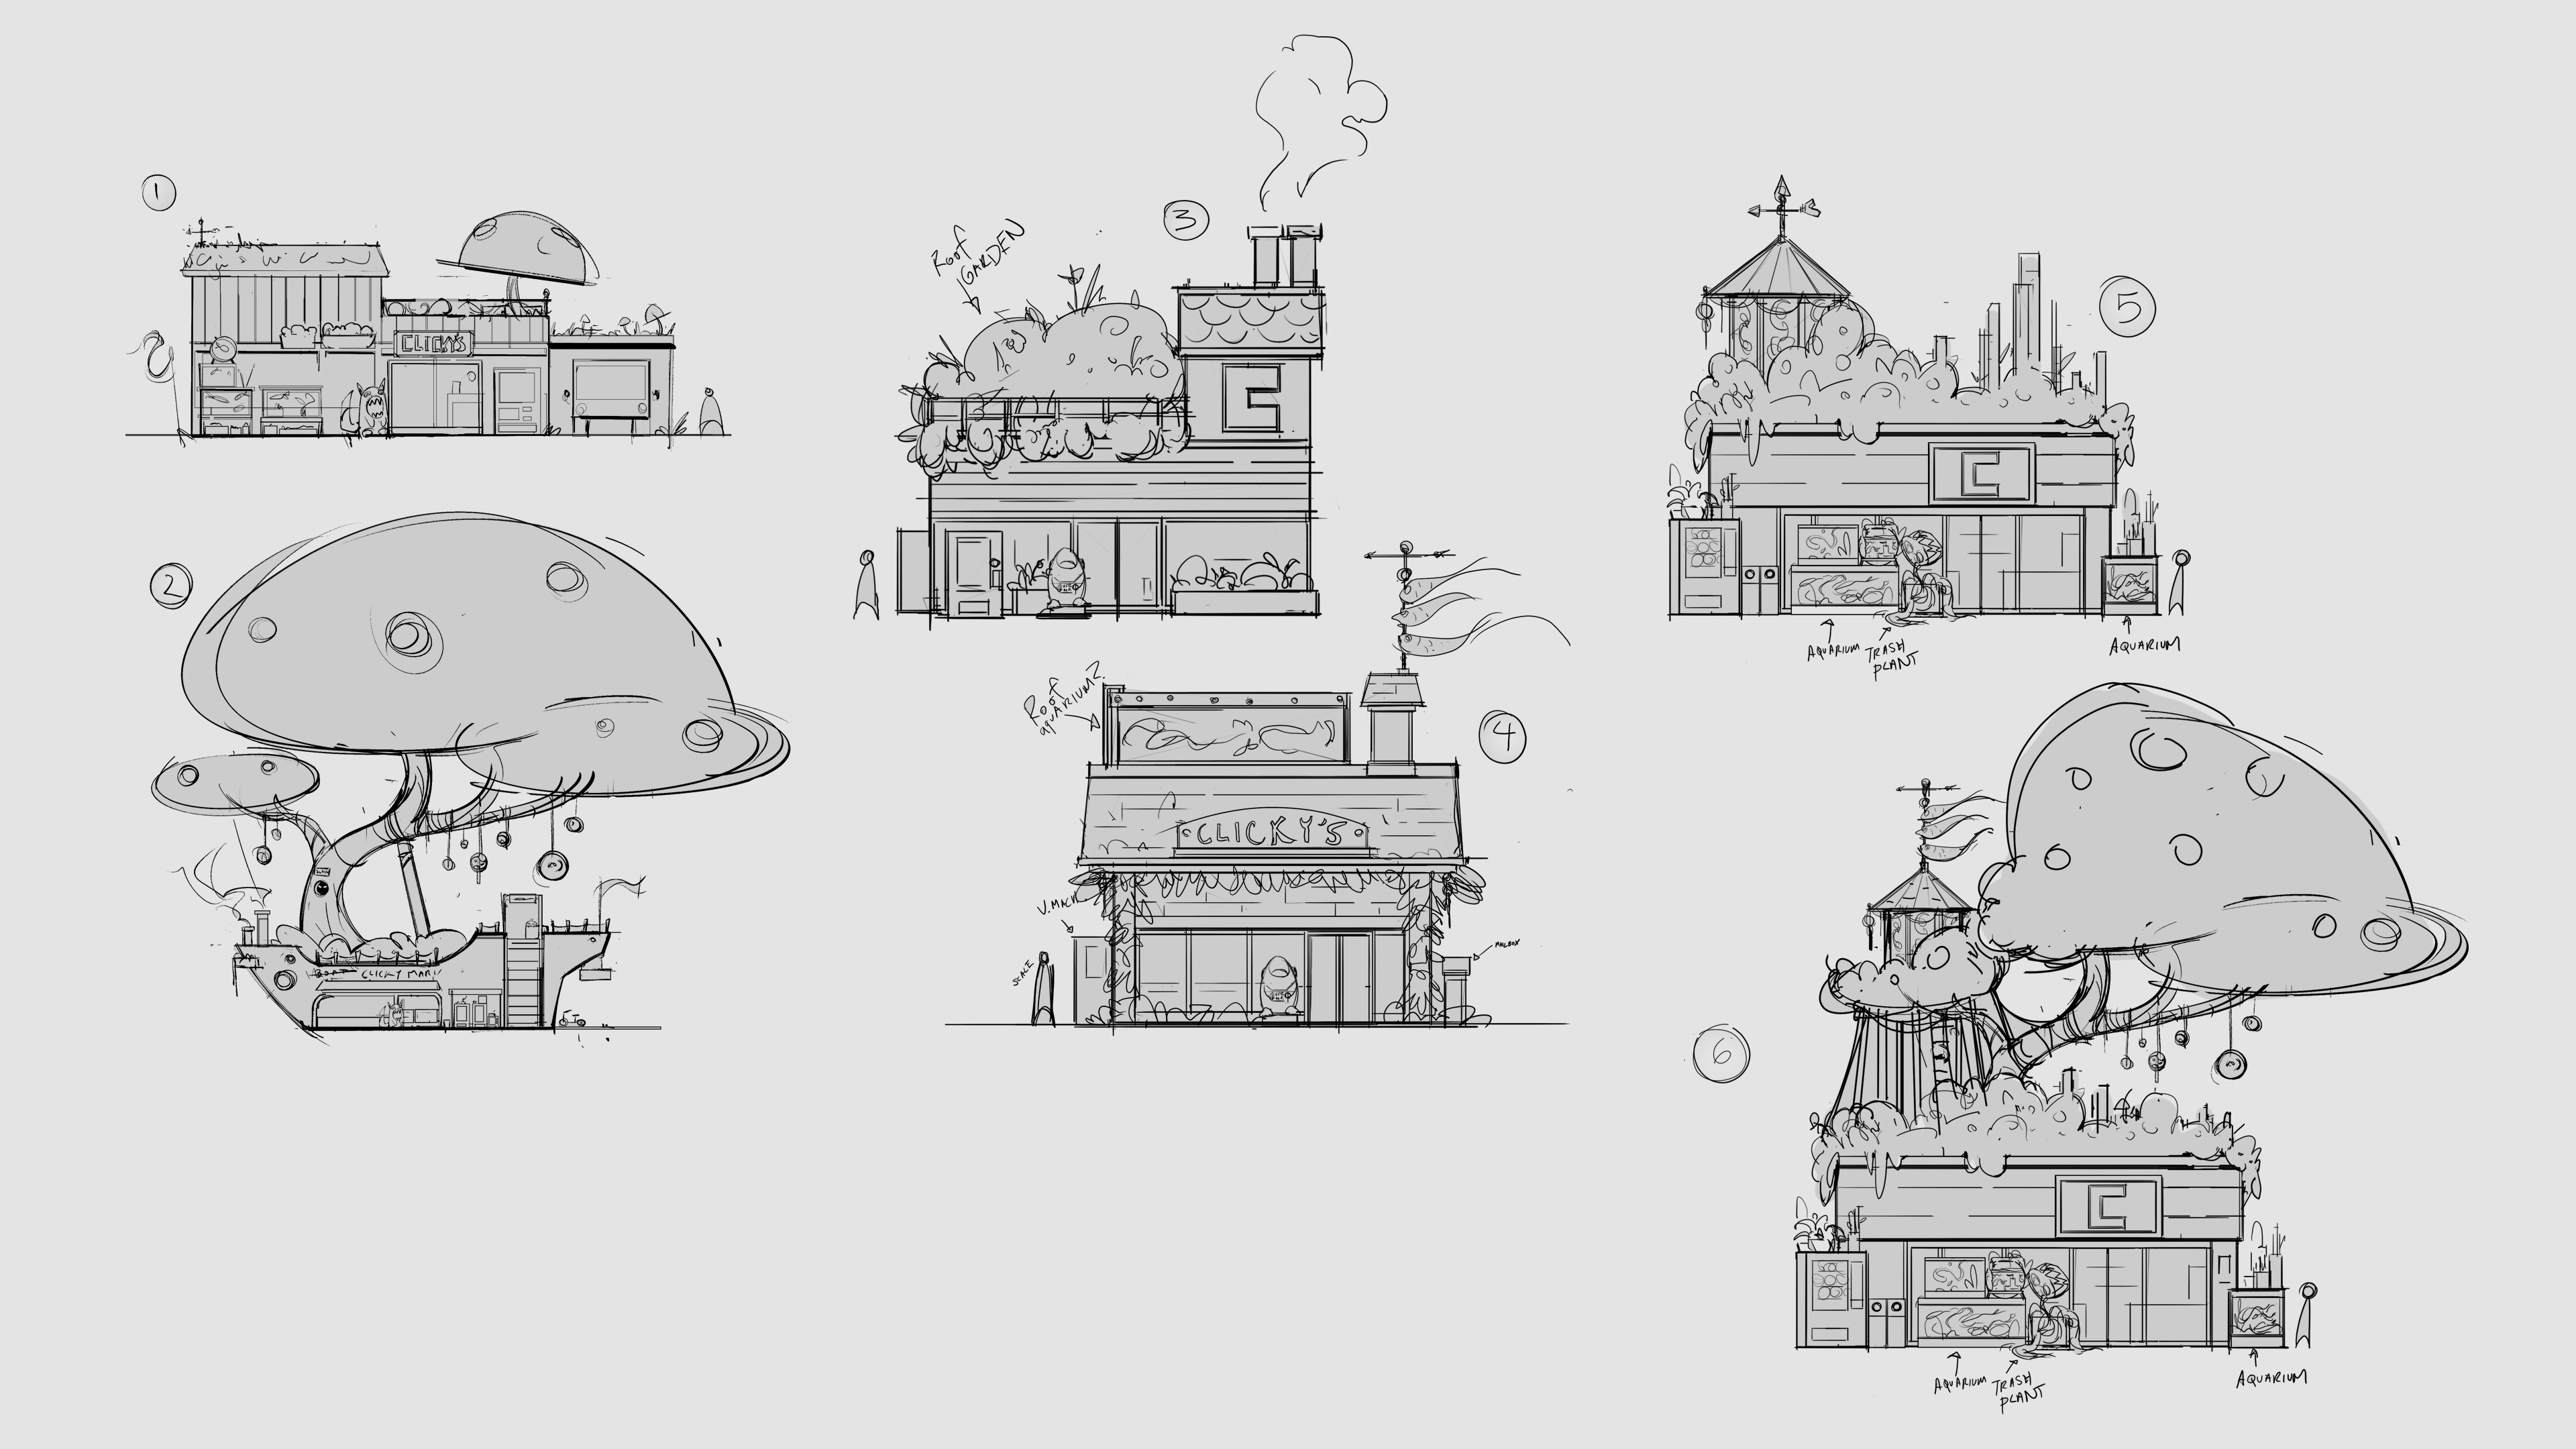 Development sketches! The final ended up being a composite of a few different ideas.